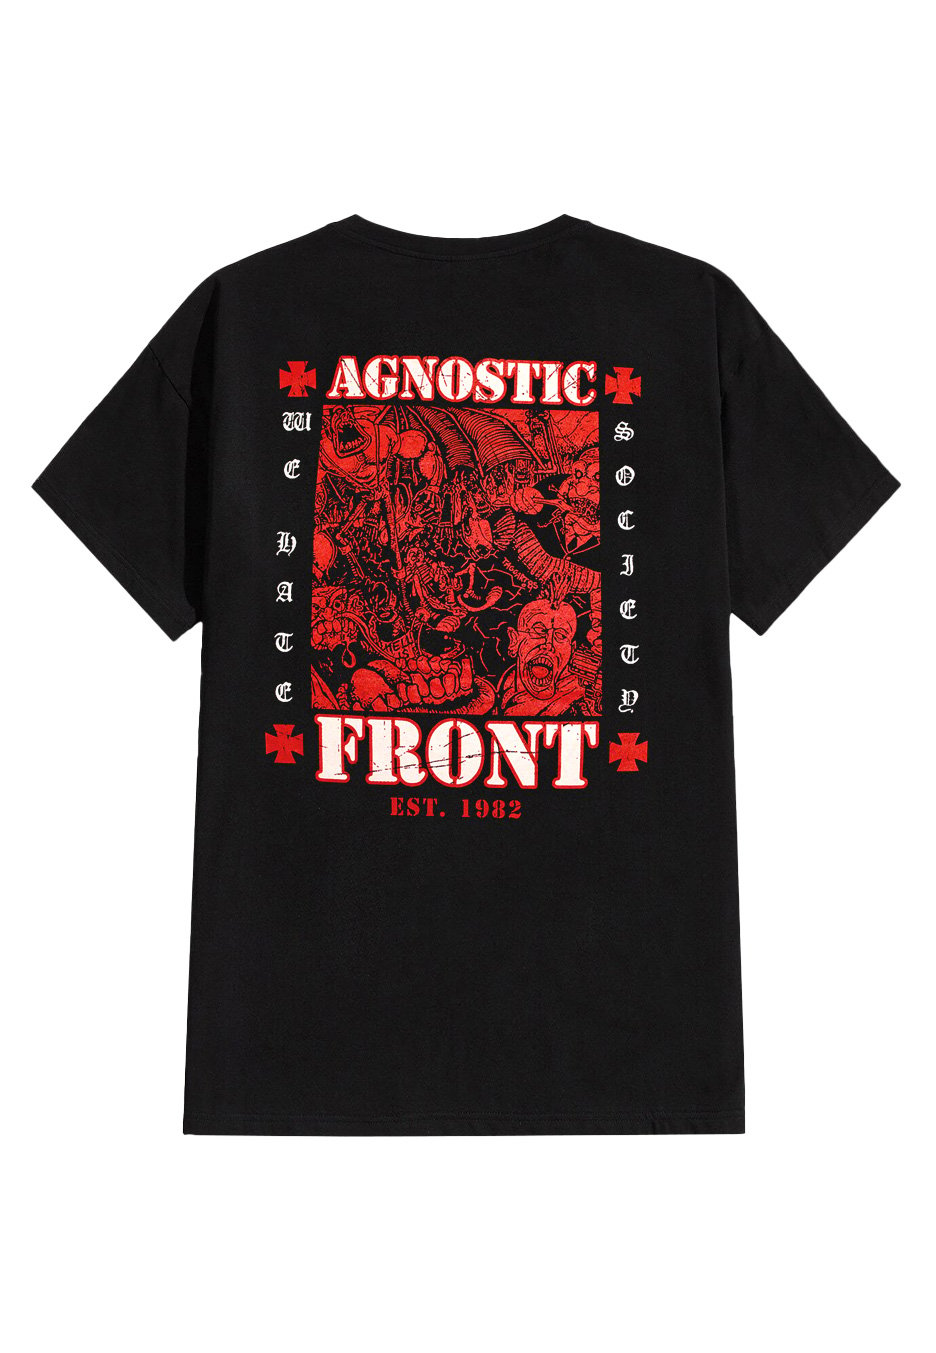 Agnostic Front - We Hate Society - T-Shirt